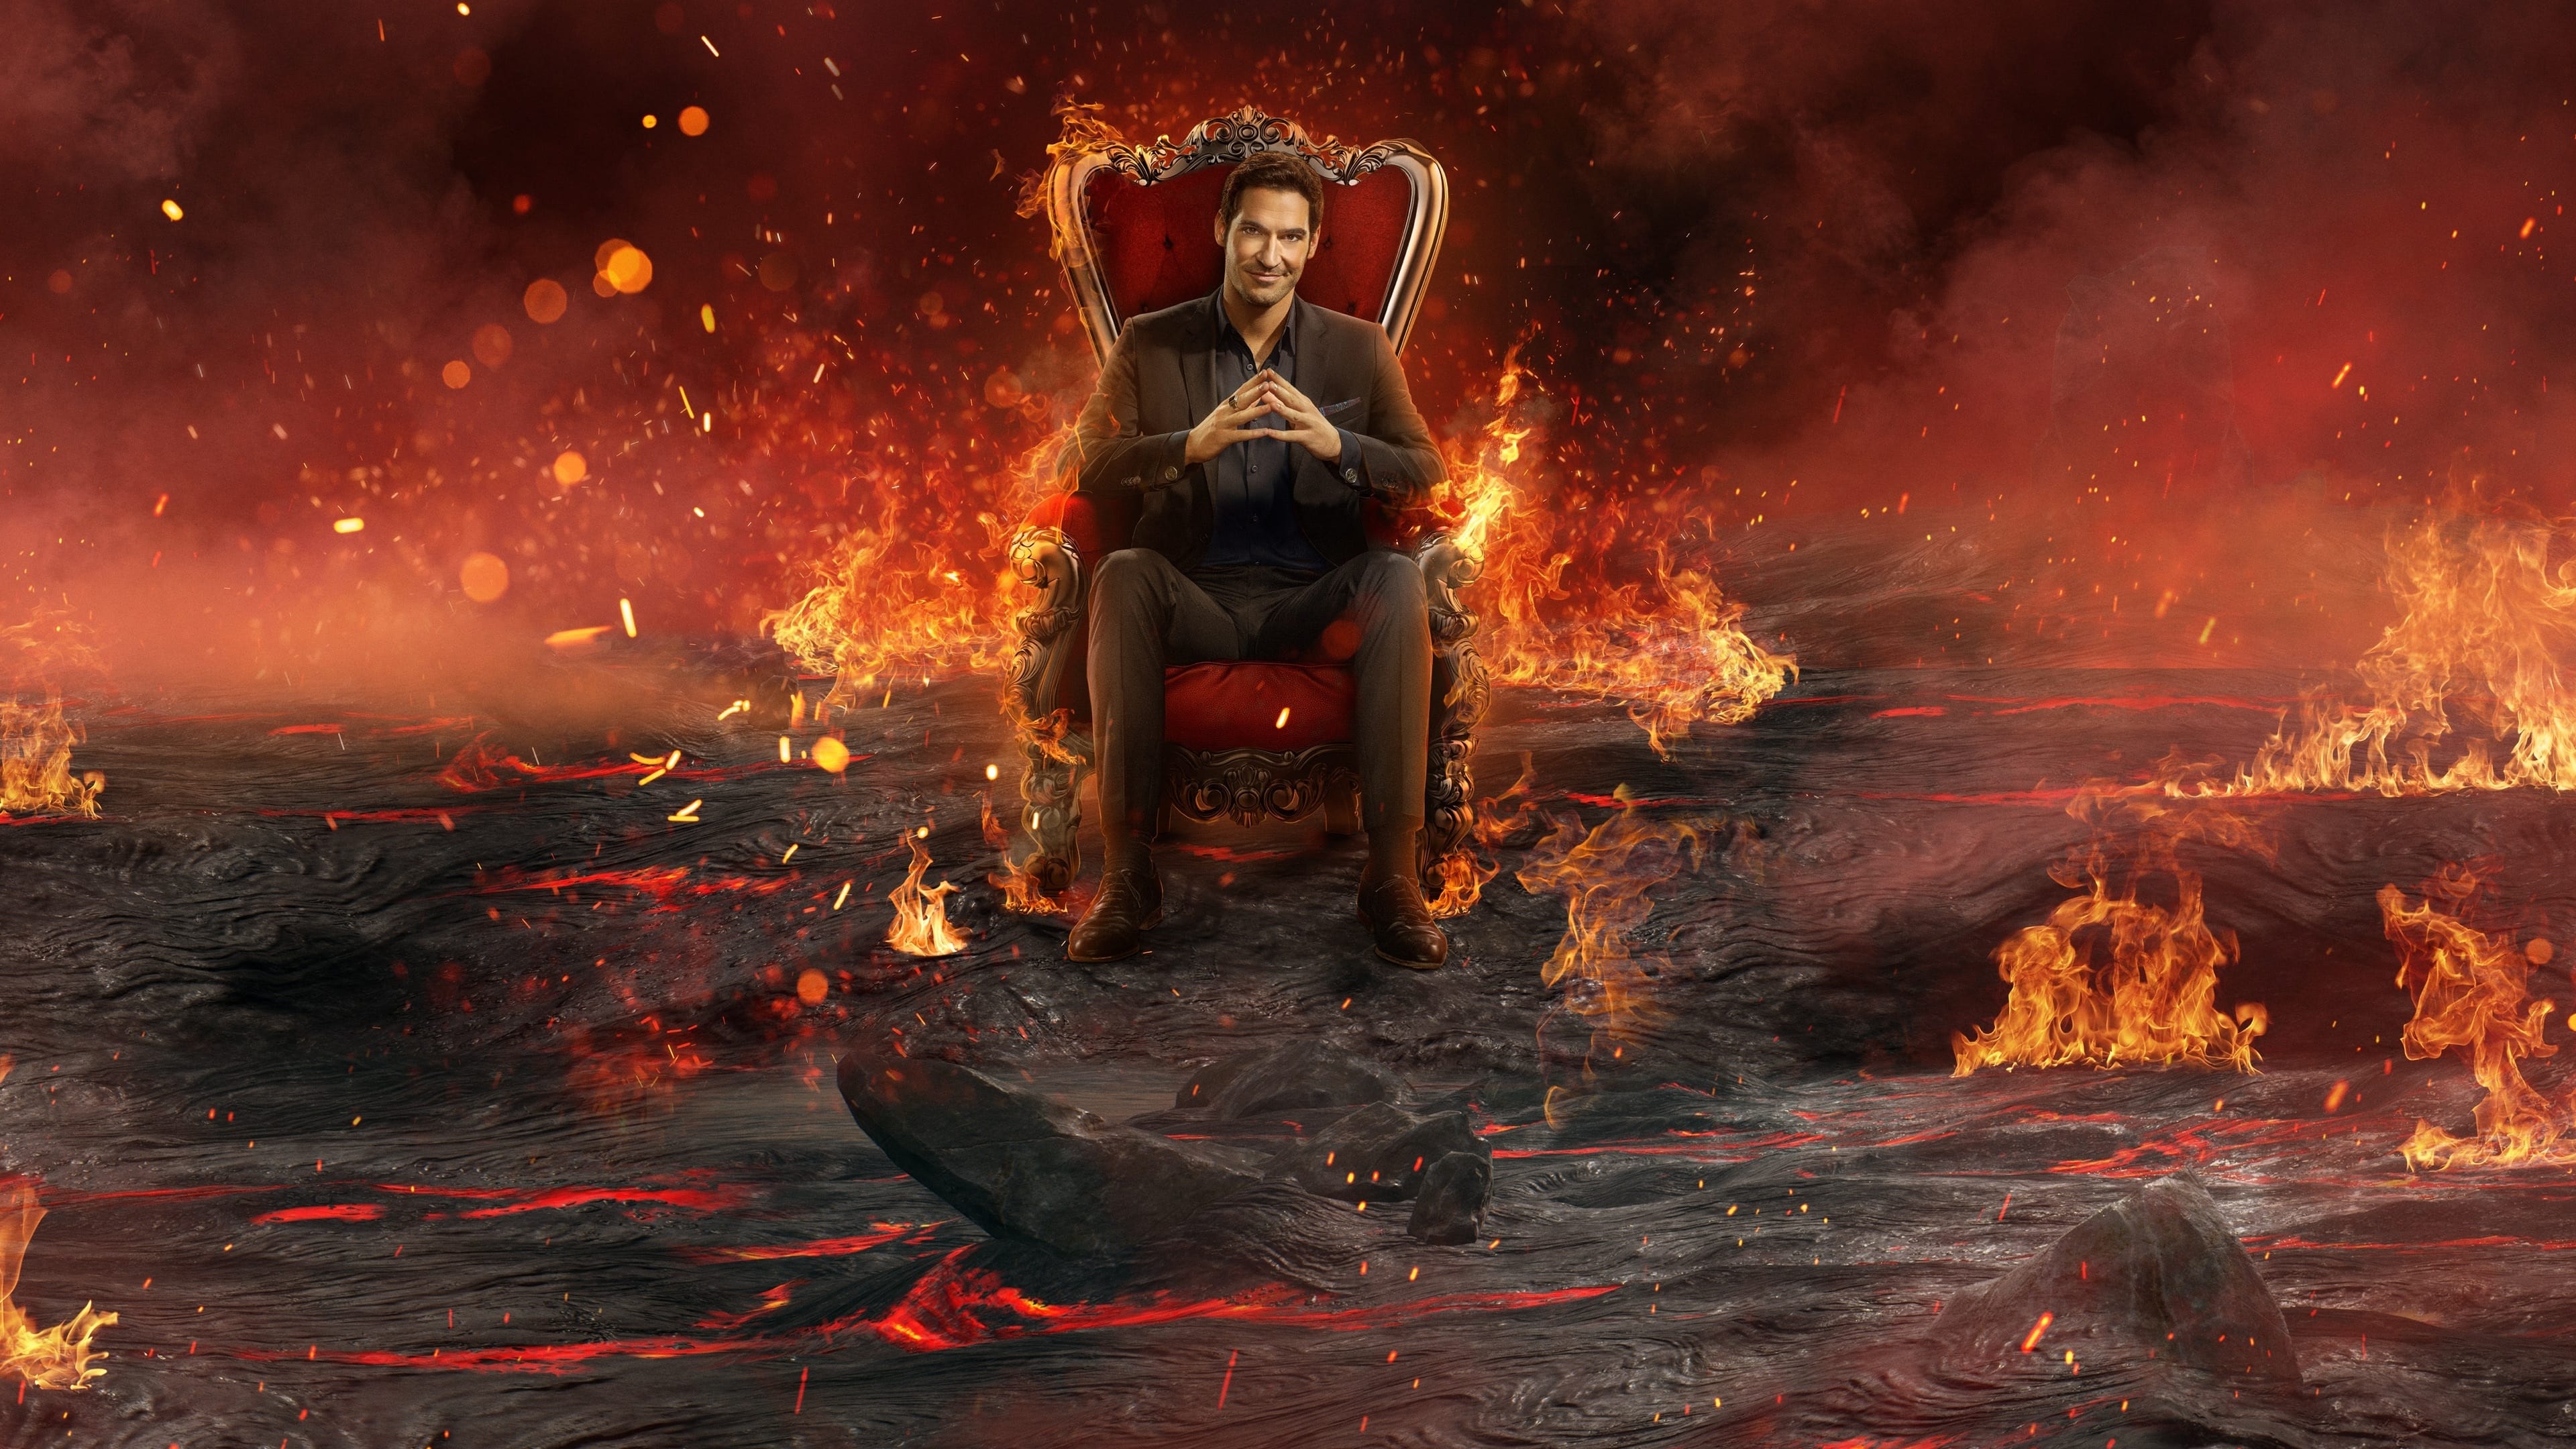 60+ Lucifer Morningstar HD Wallpapers and Backgrounds